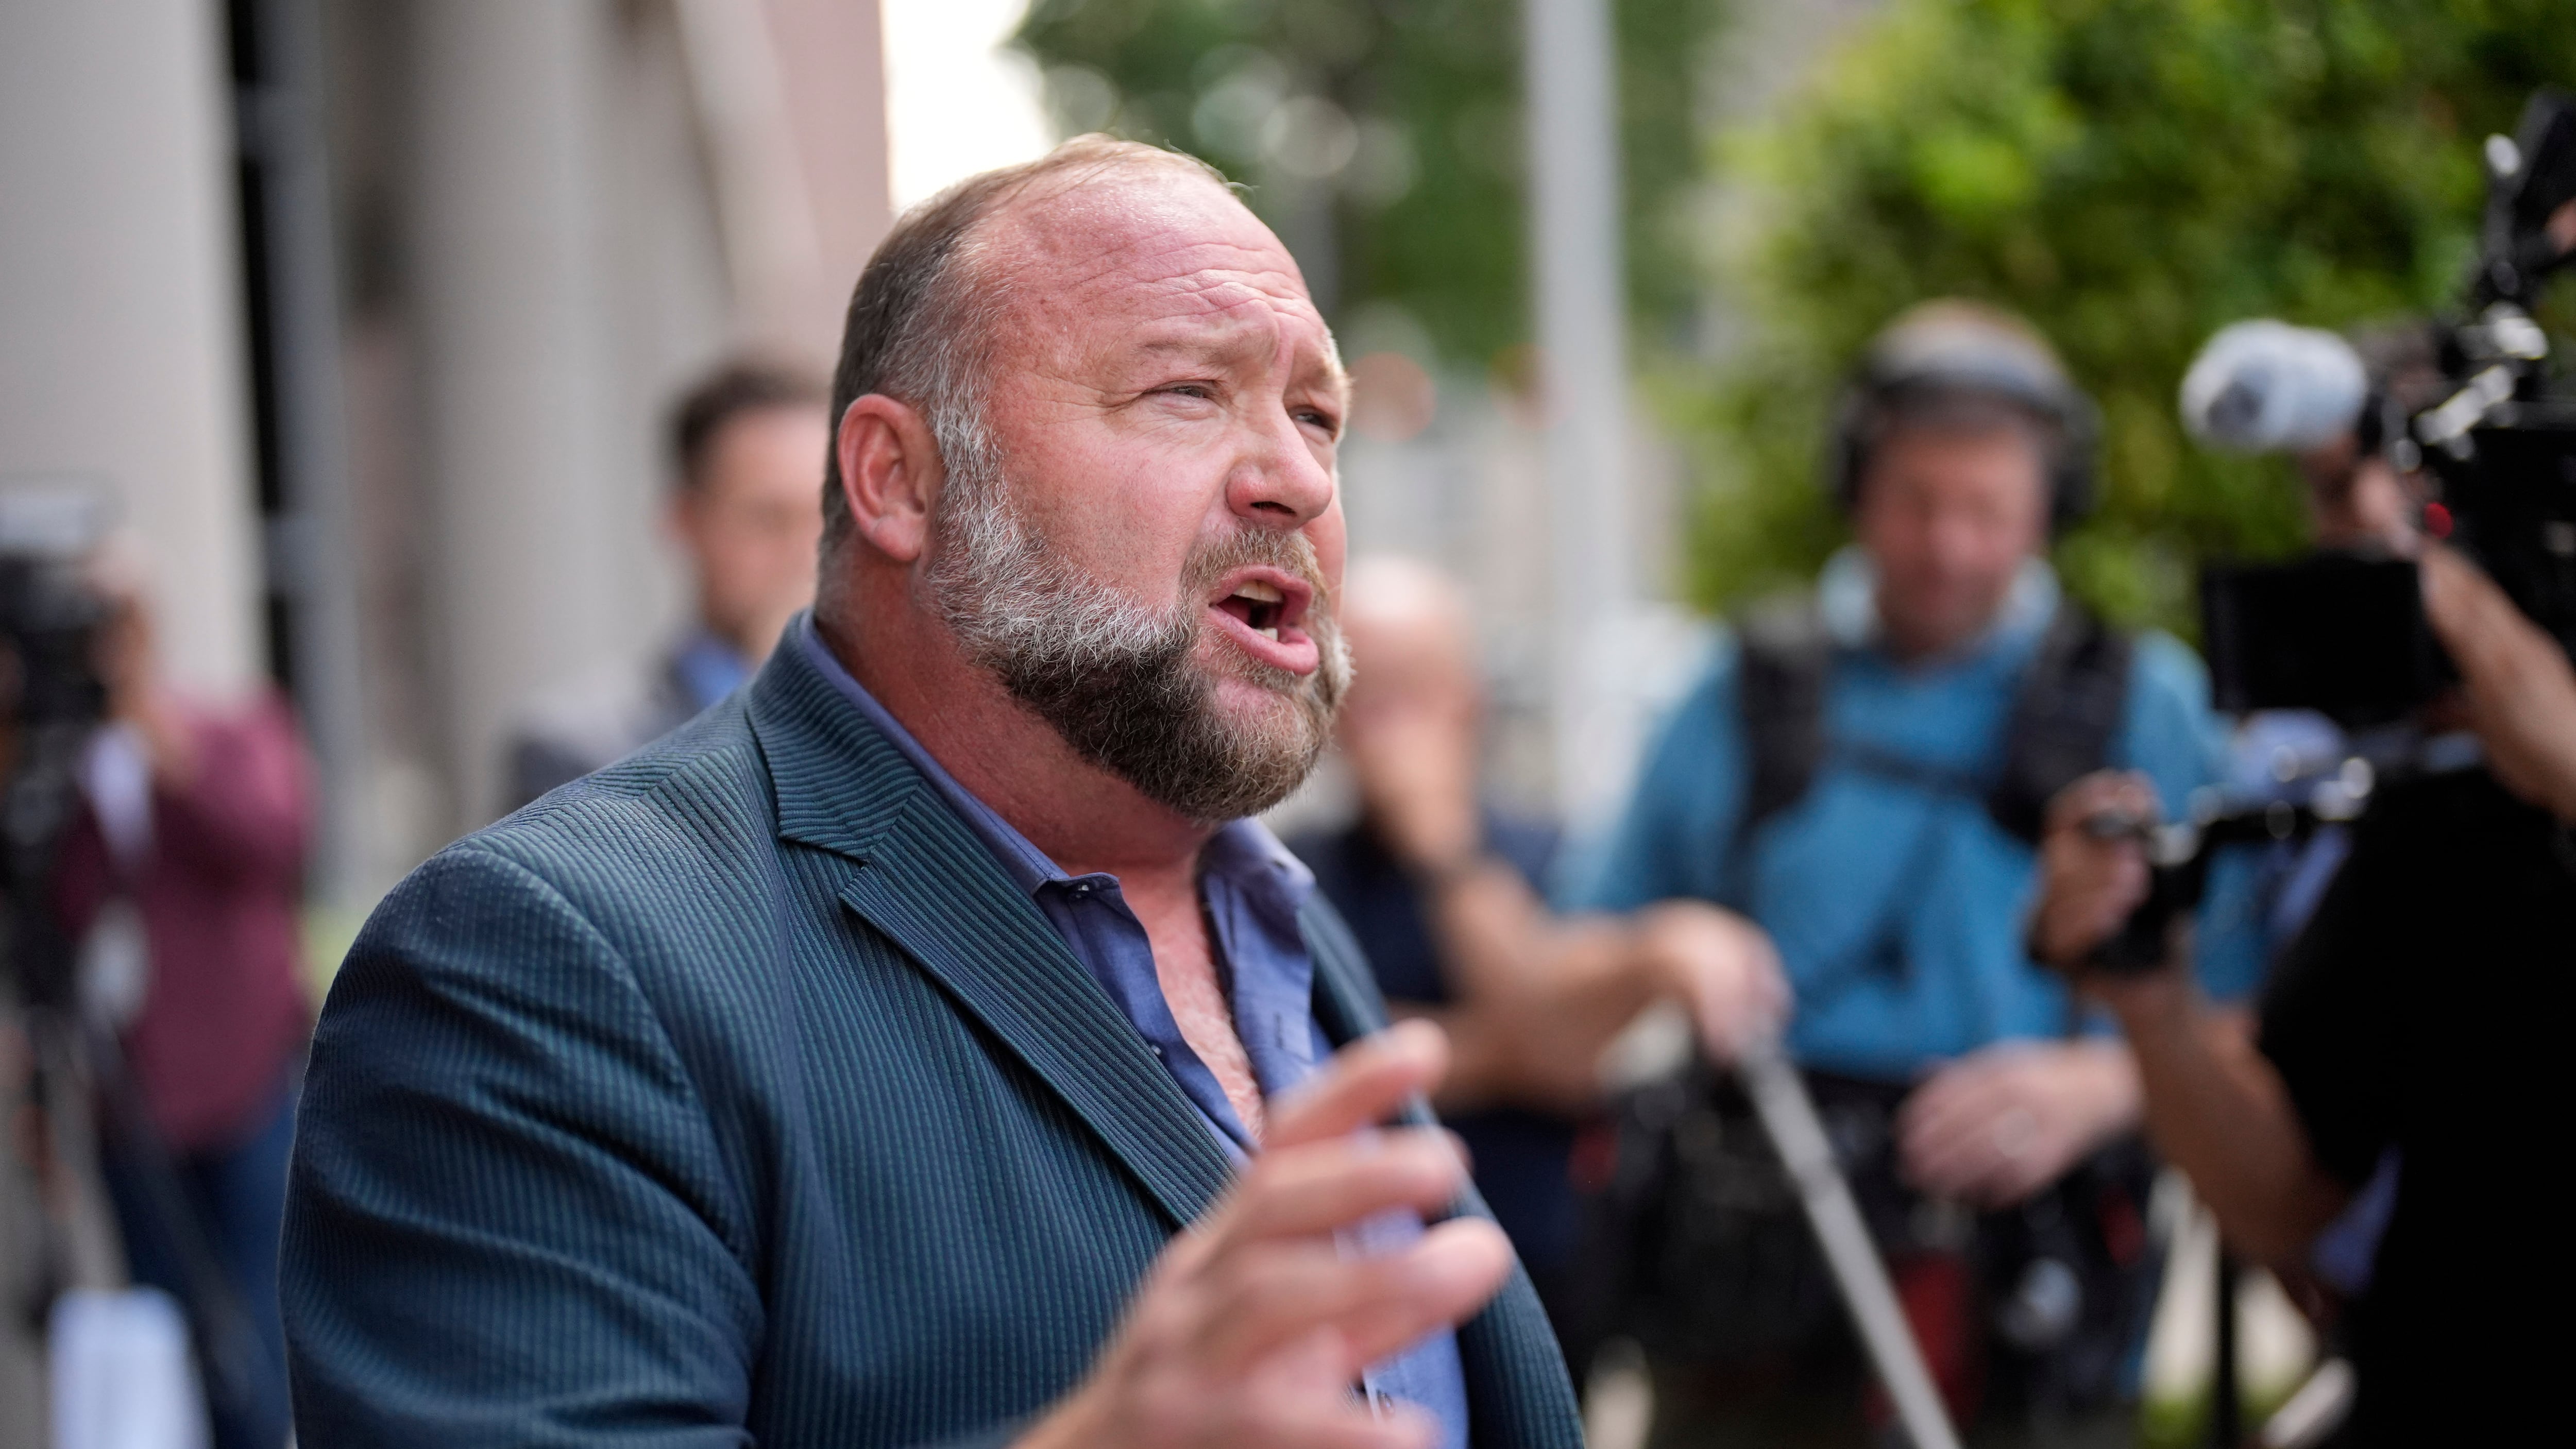 Conspiracy theorist Alex Jones speaks to the media after arriving at court for an earlier hearing (David J Phillip/AP)